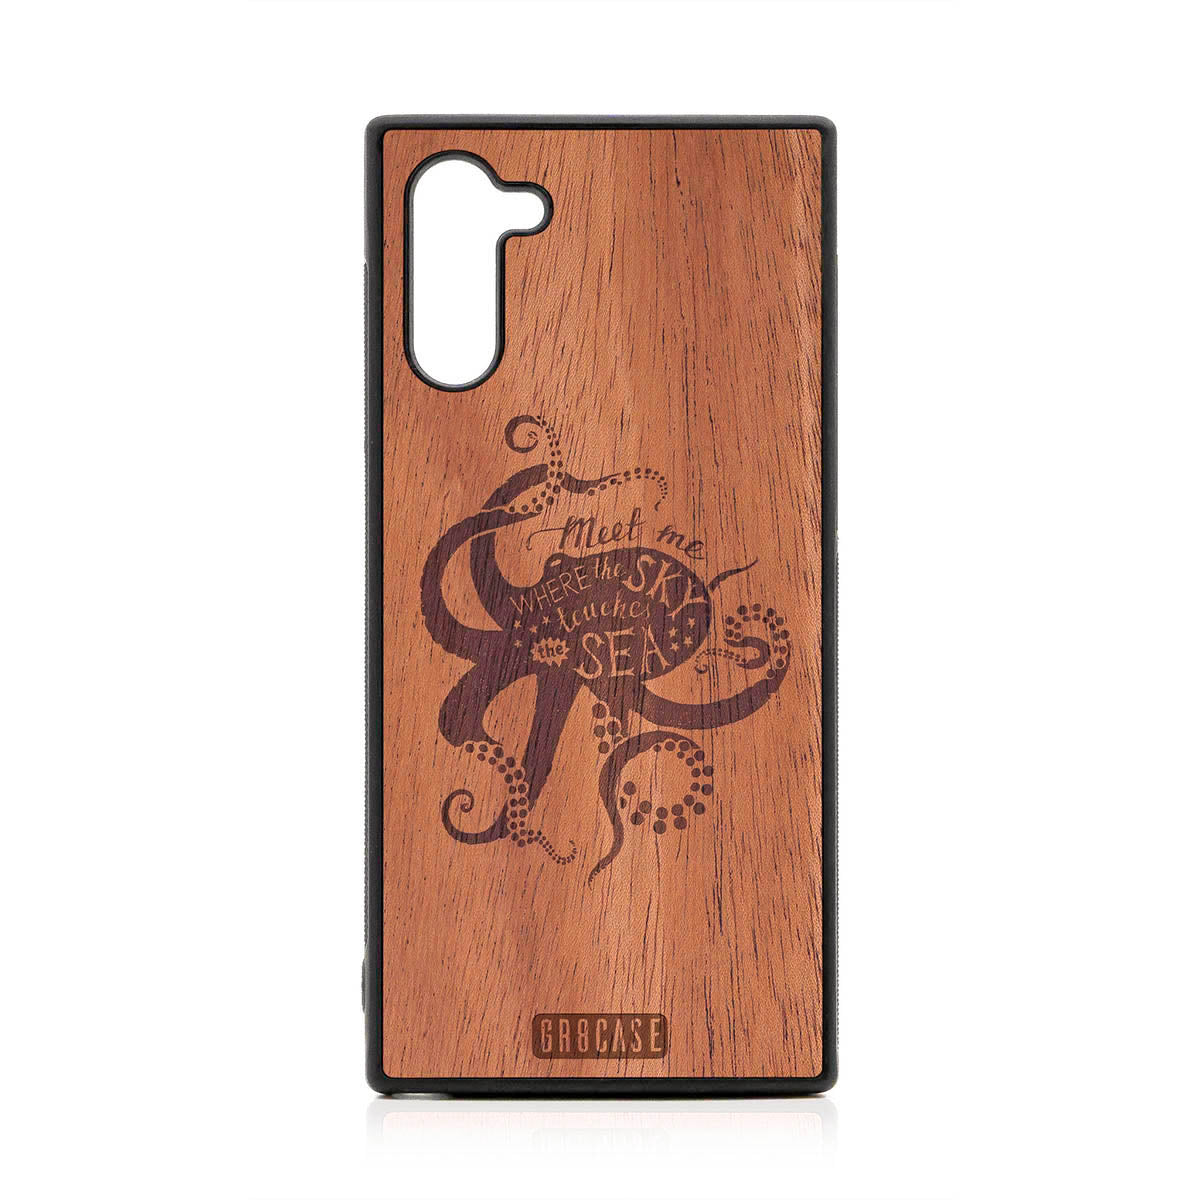 Meet Me Where The Sky Touches The Sea (Octopus) Design Wood Case For Samsung Galaxy Note 10